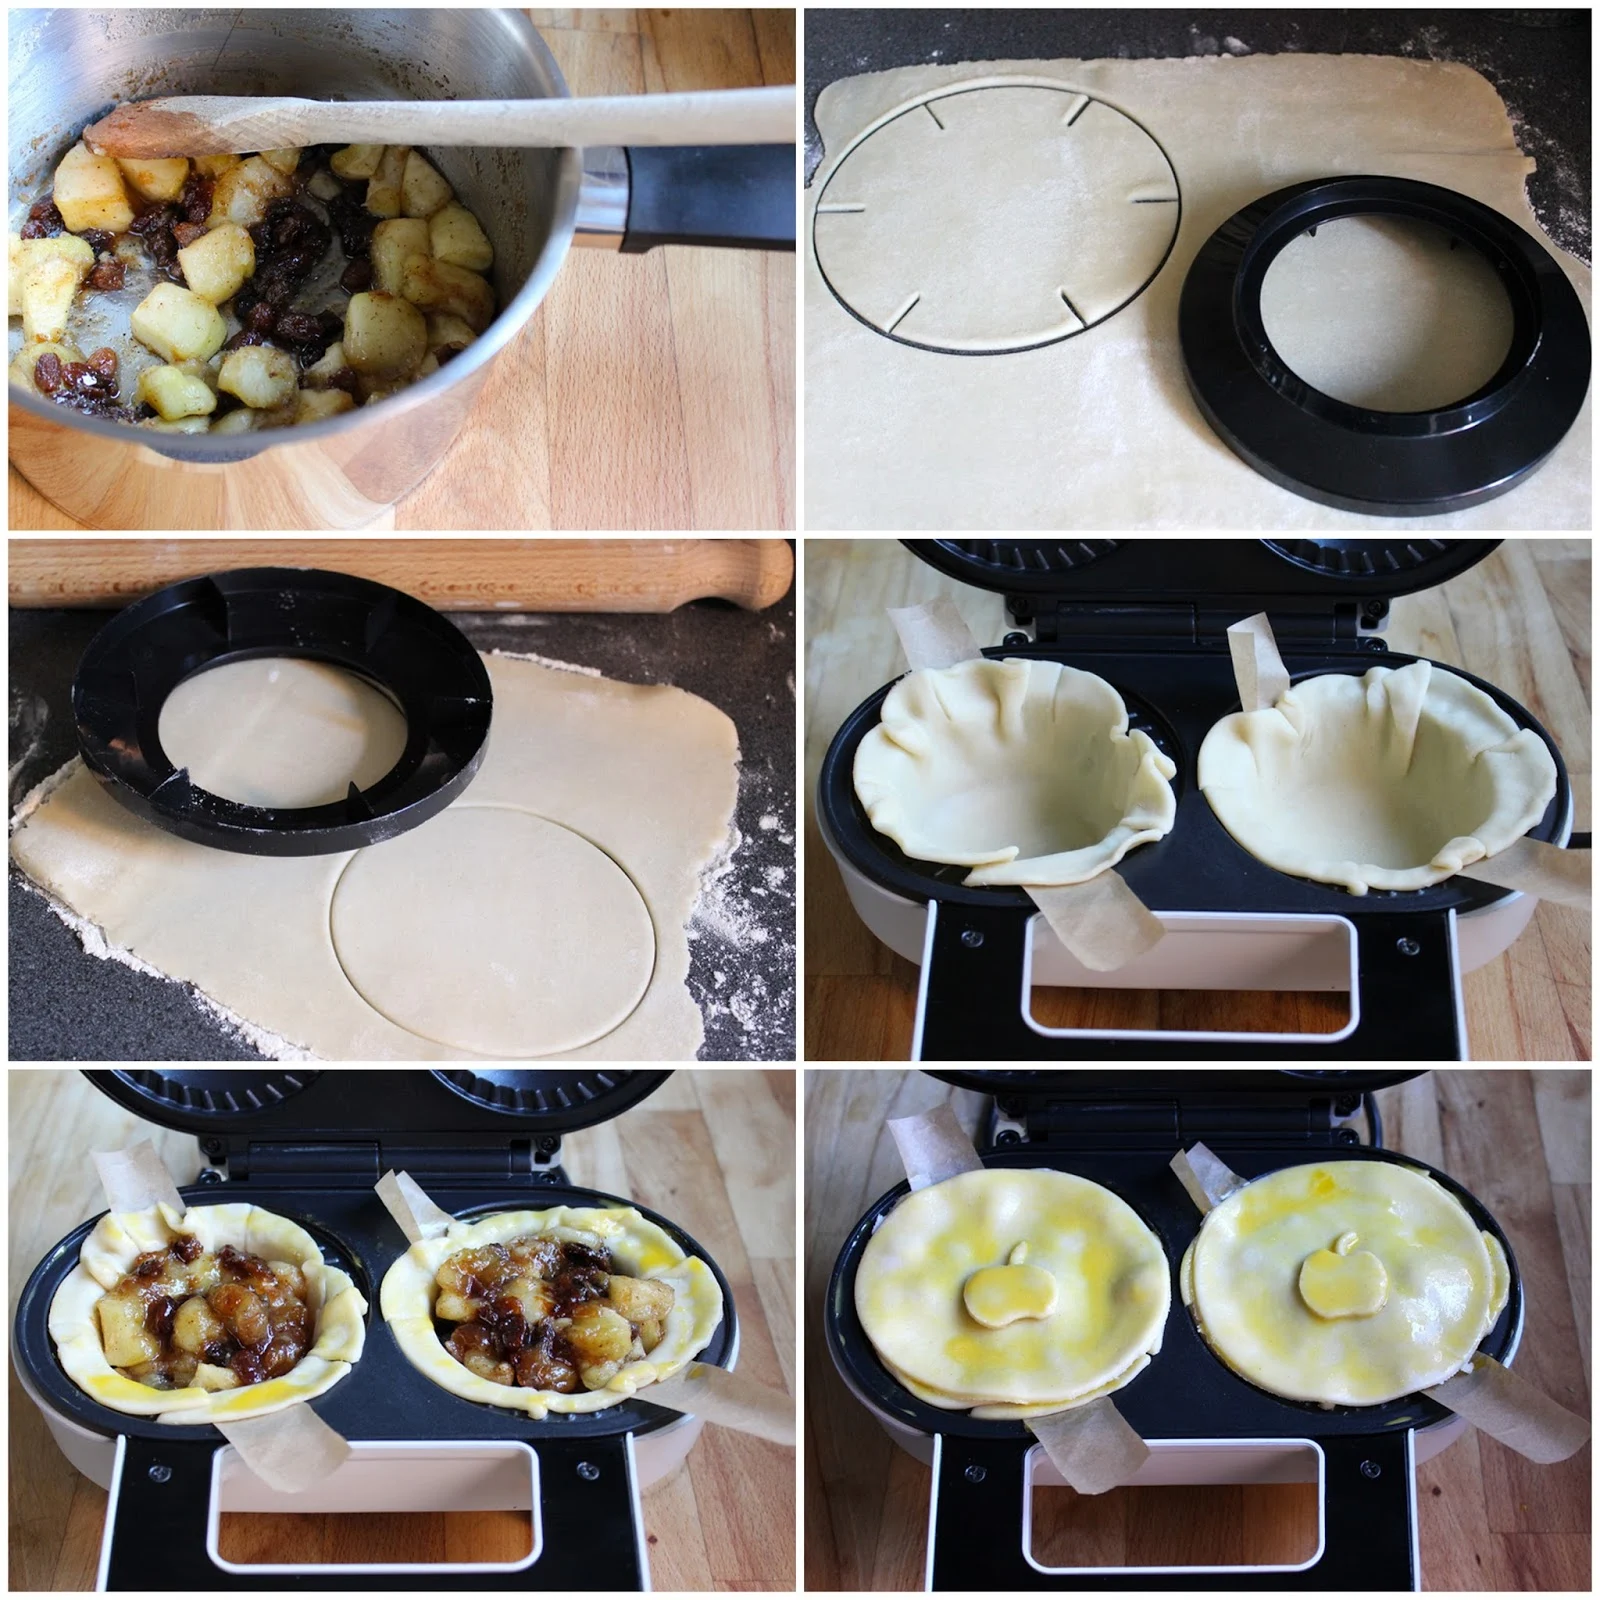 How to use an electric pie maker